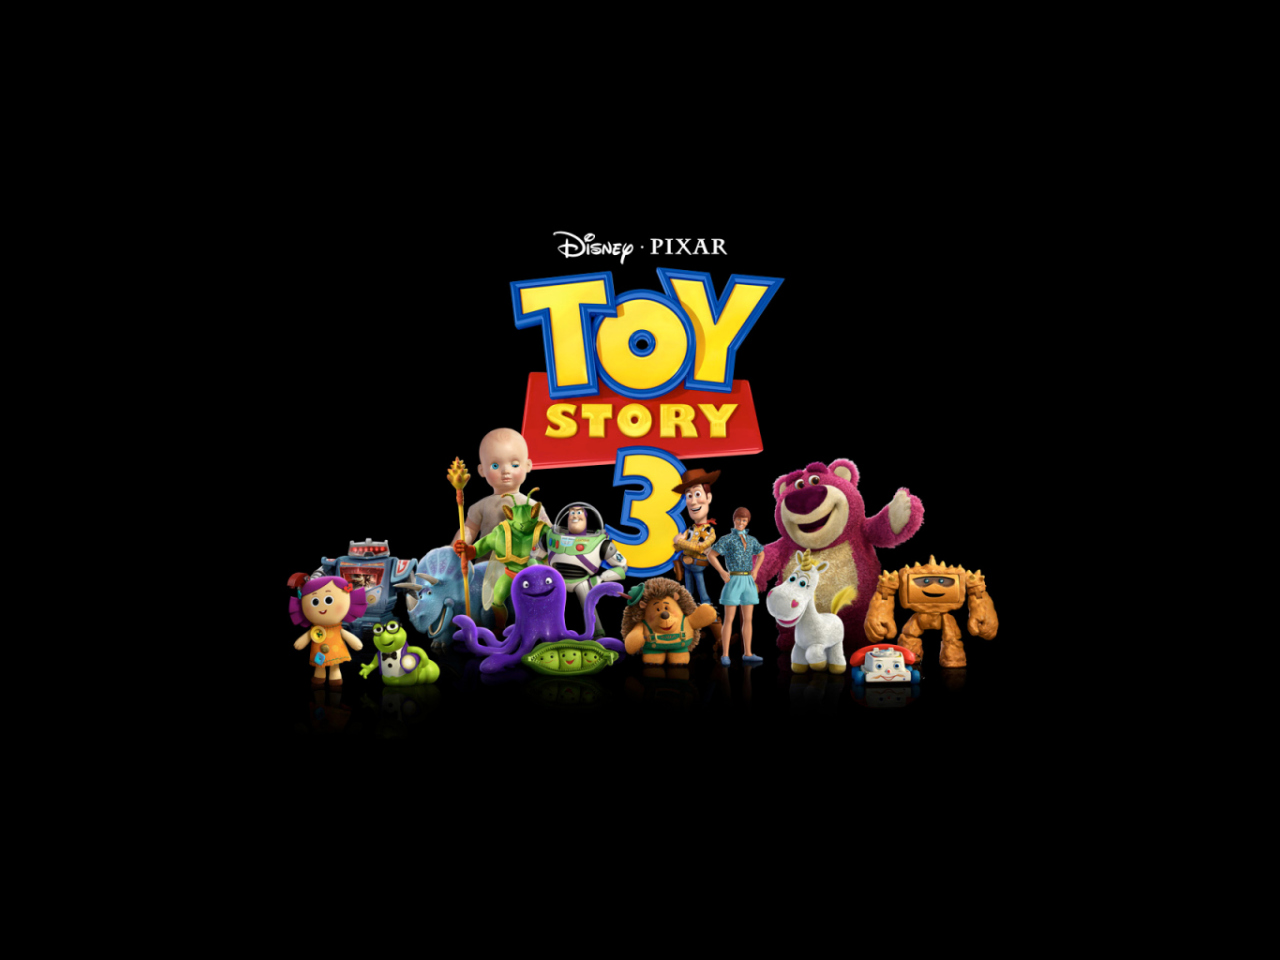 Toy Story 3 wallpaper 1280x960